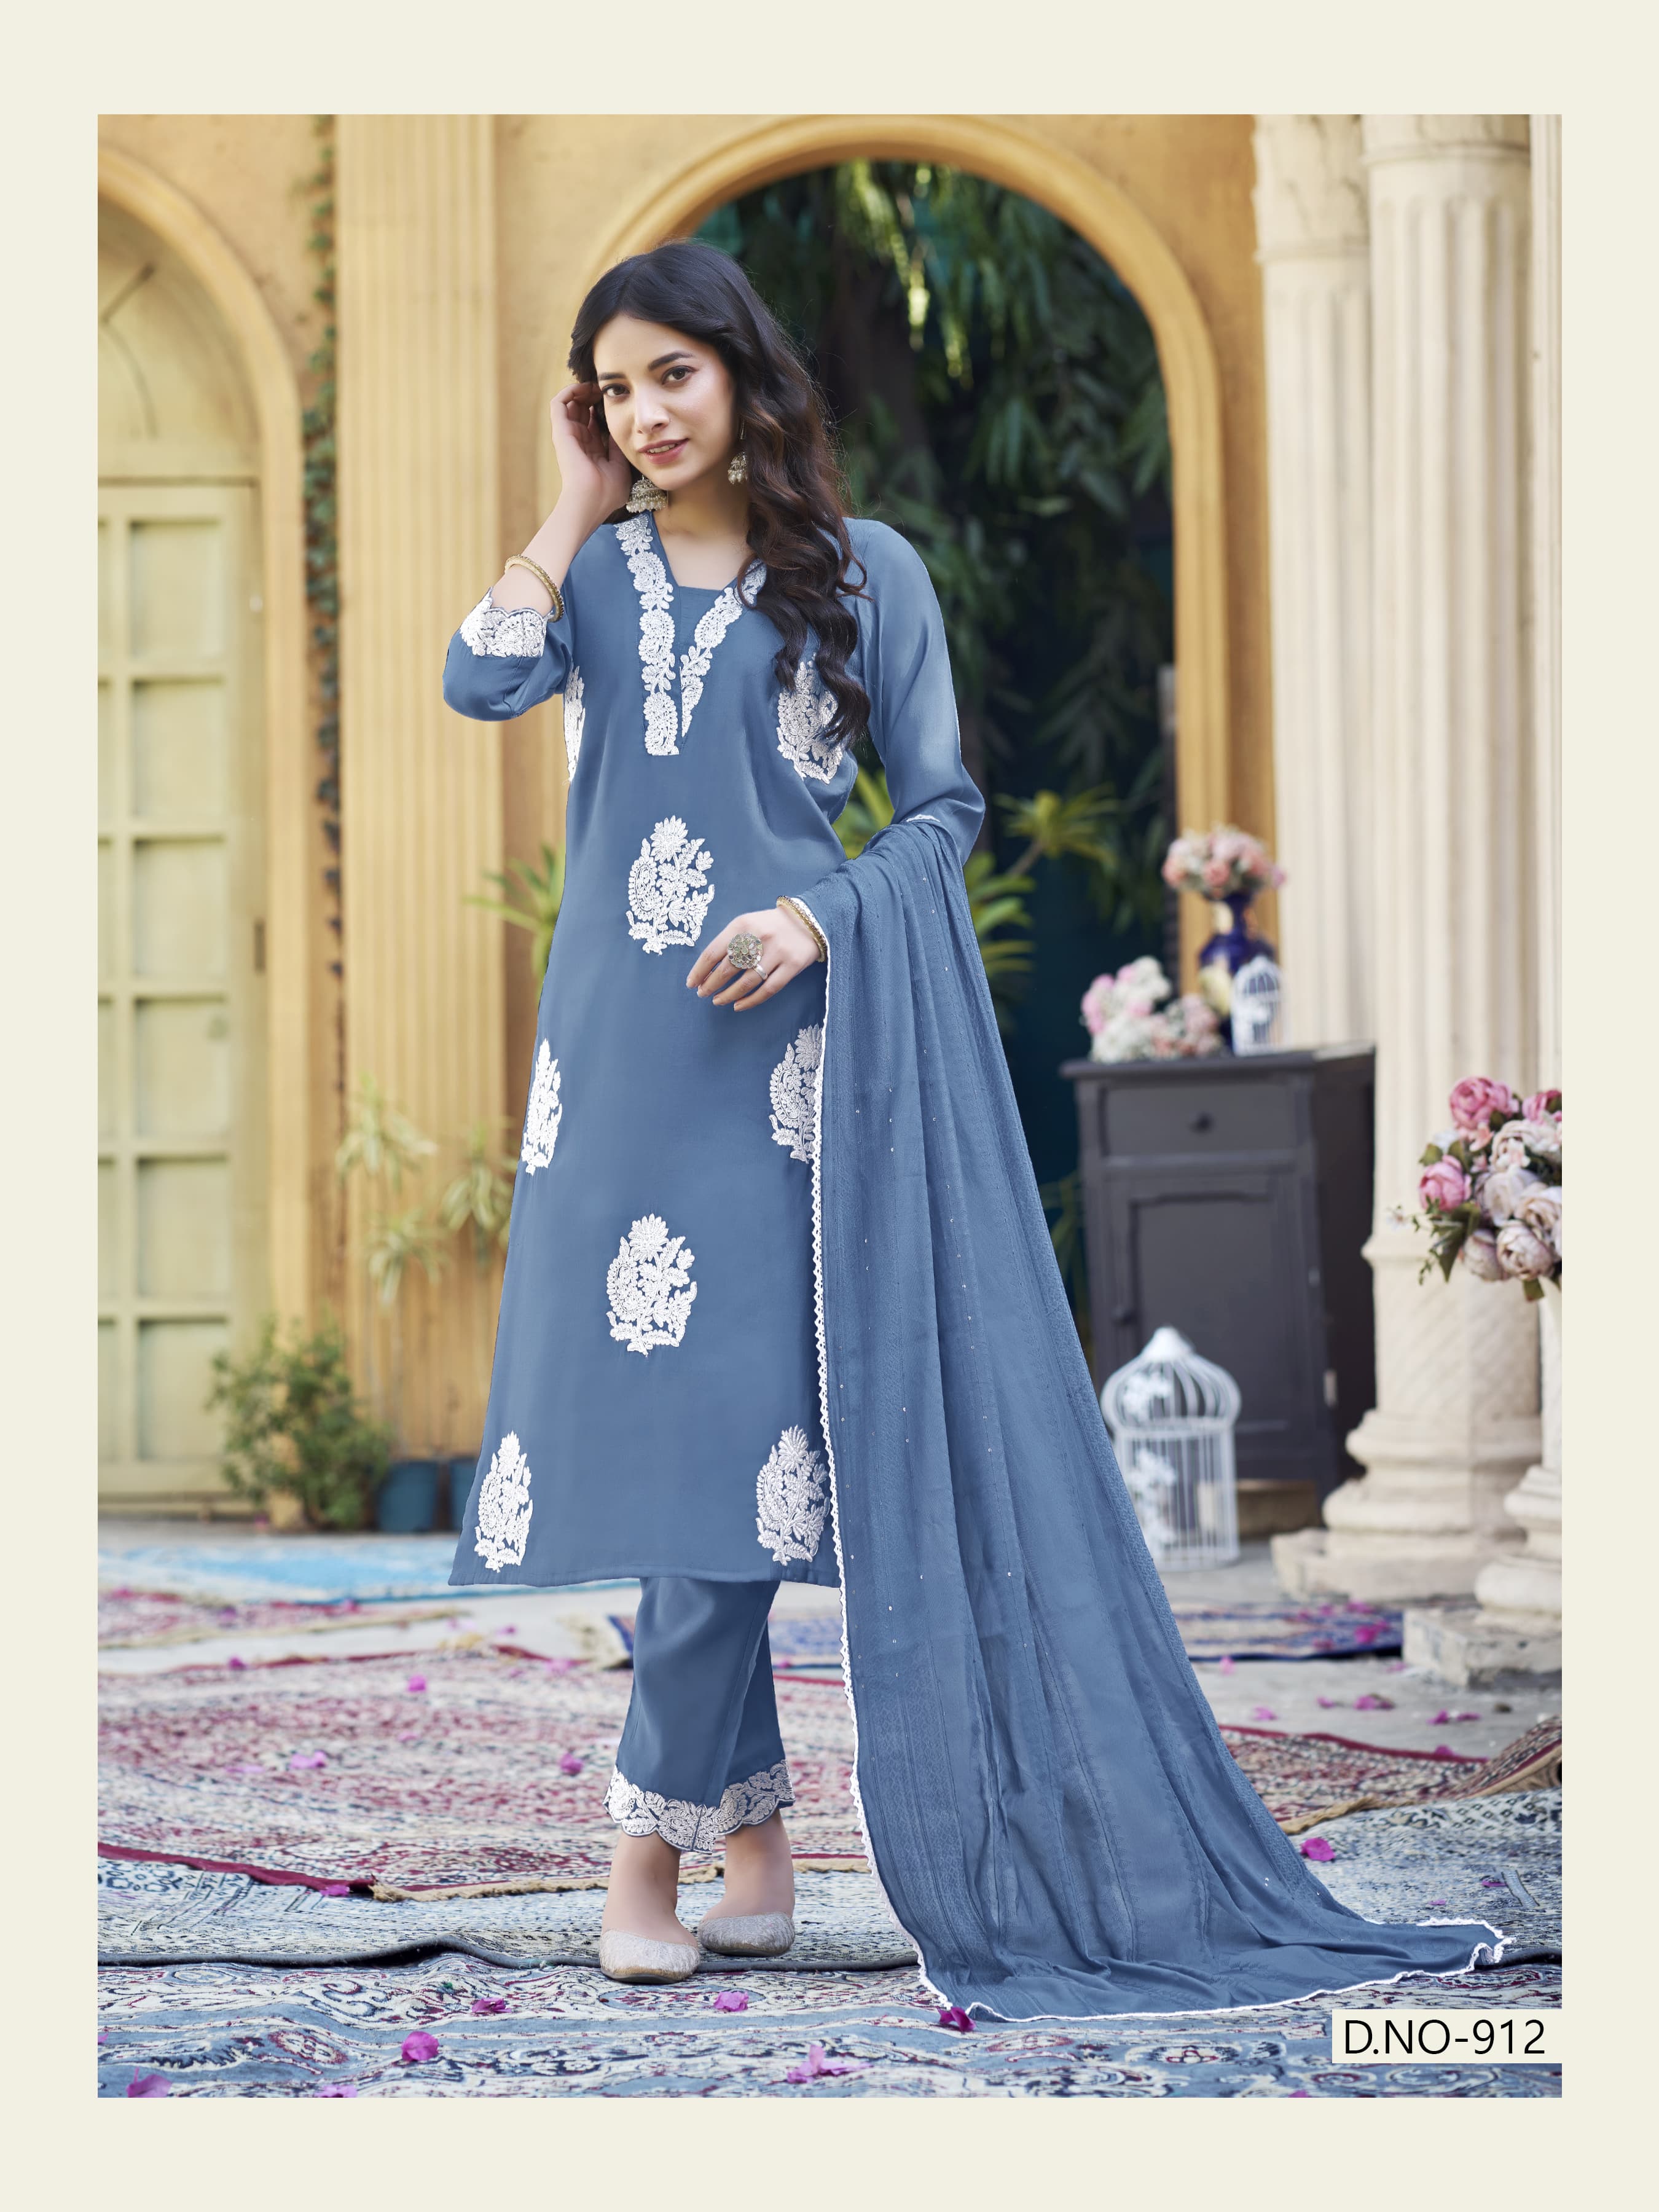 Premium pure Viscose Roman with cording with thread work and soft muslin dupatta Kurtis set for online sale